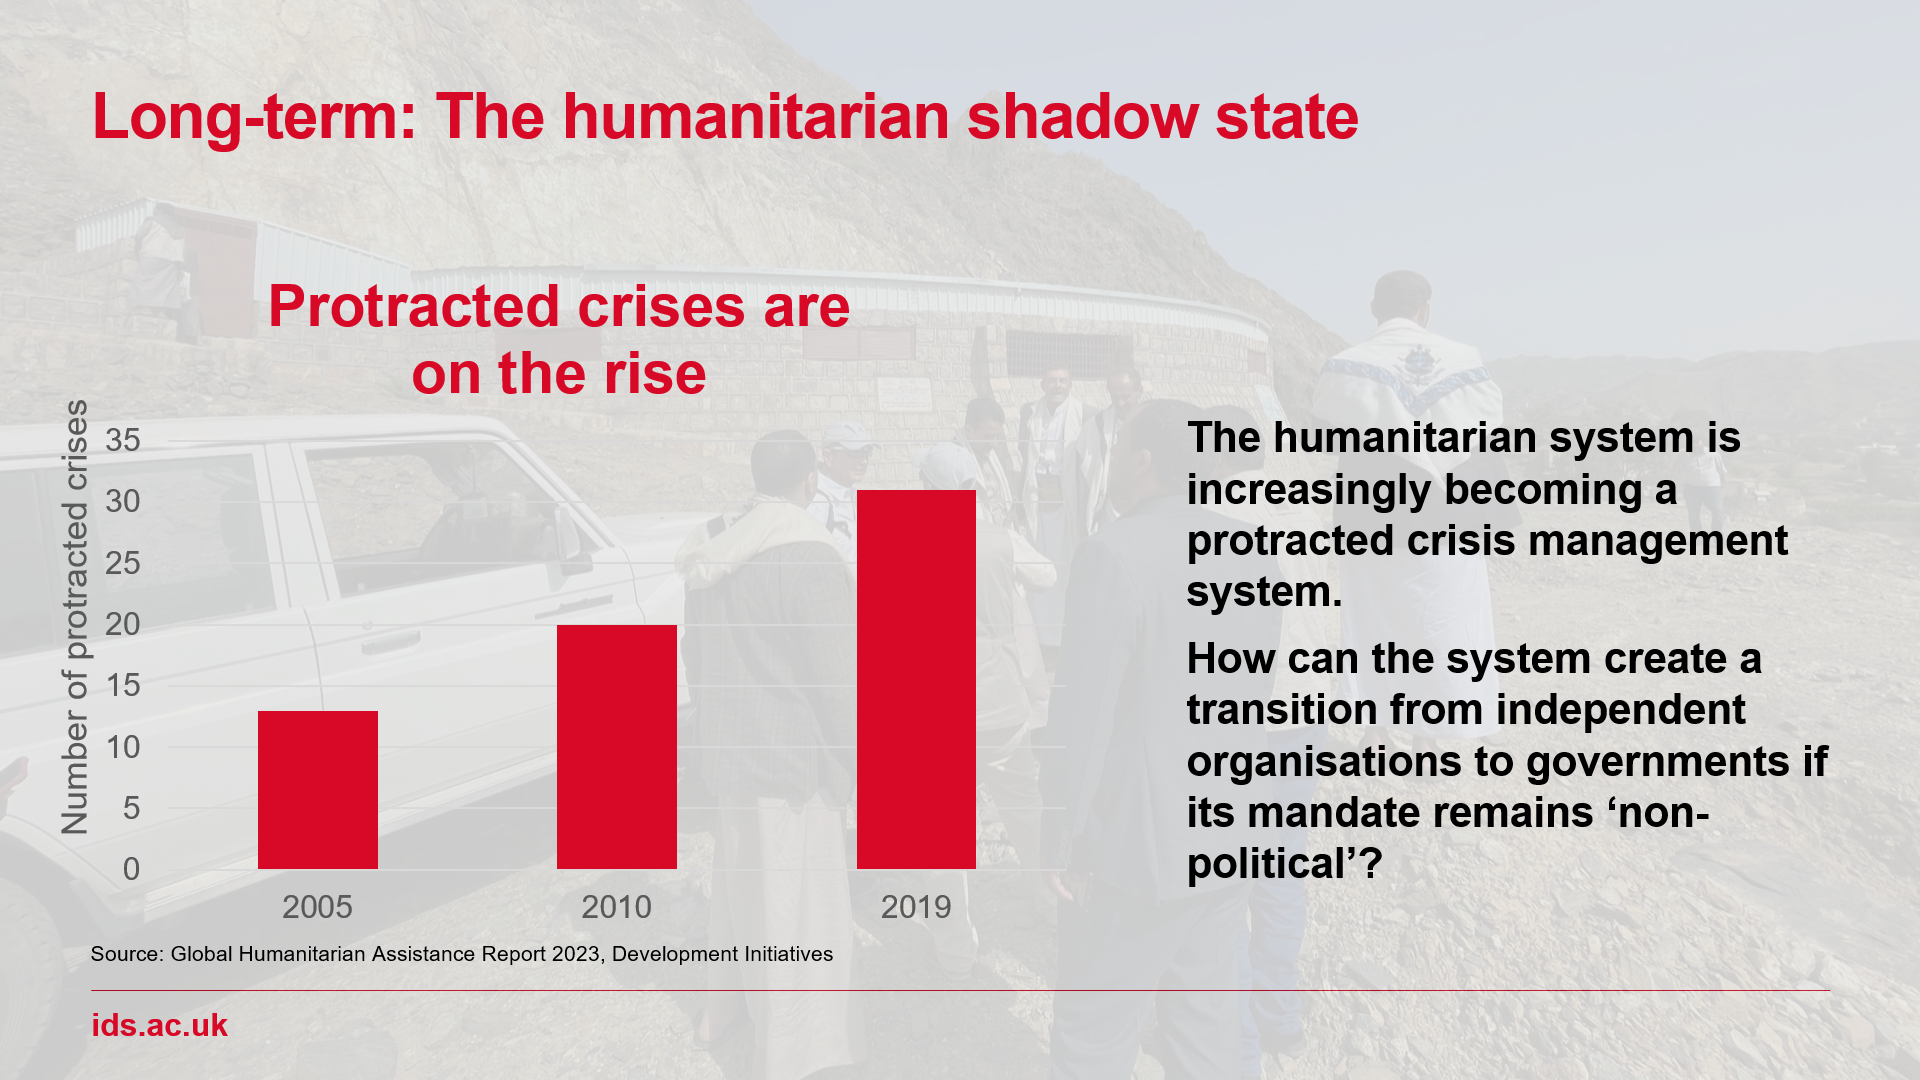 Graphic showing protracted crises have risen between 2005 and 2019